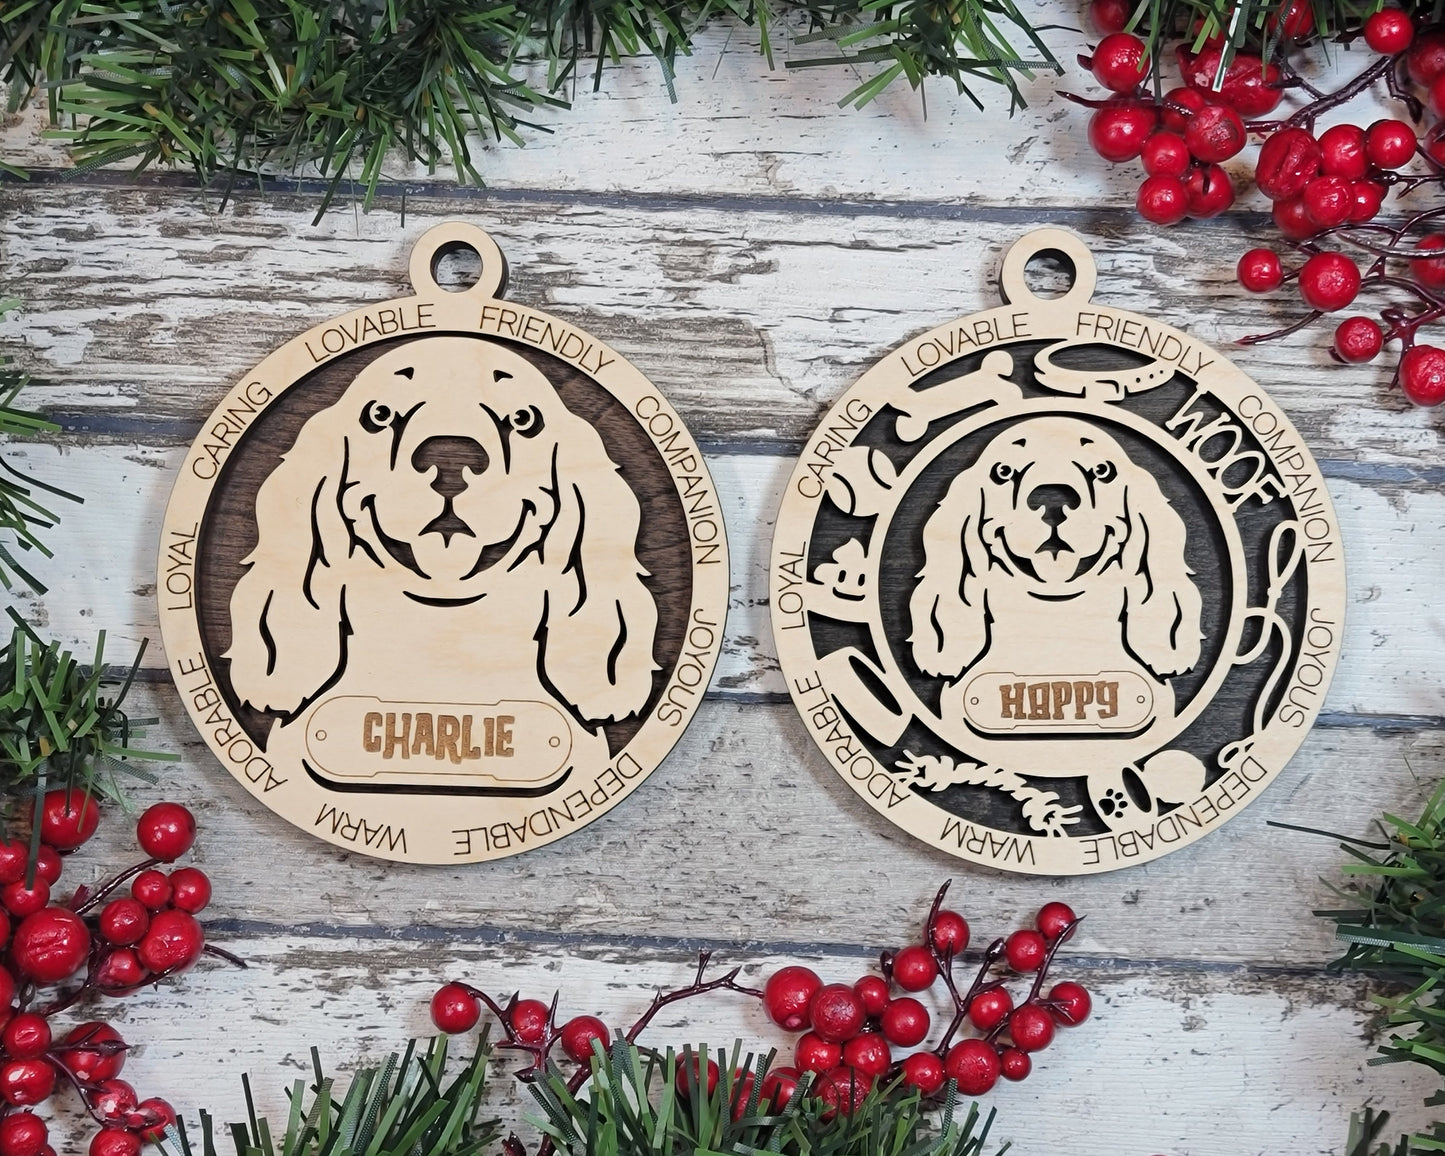 Cocker Spaniel - Adorable Dog Ornaments - 2 Ornaments included - SVG, PDF, AI File Download - Sized for Glowforge